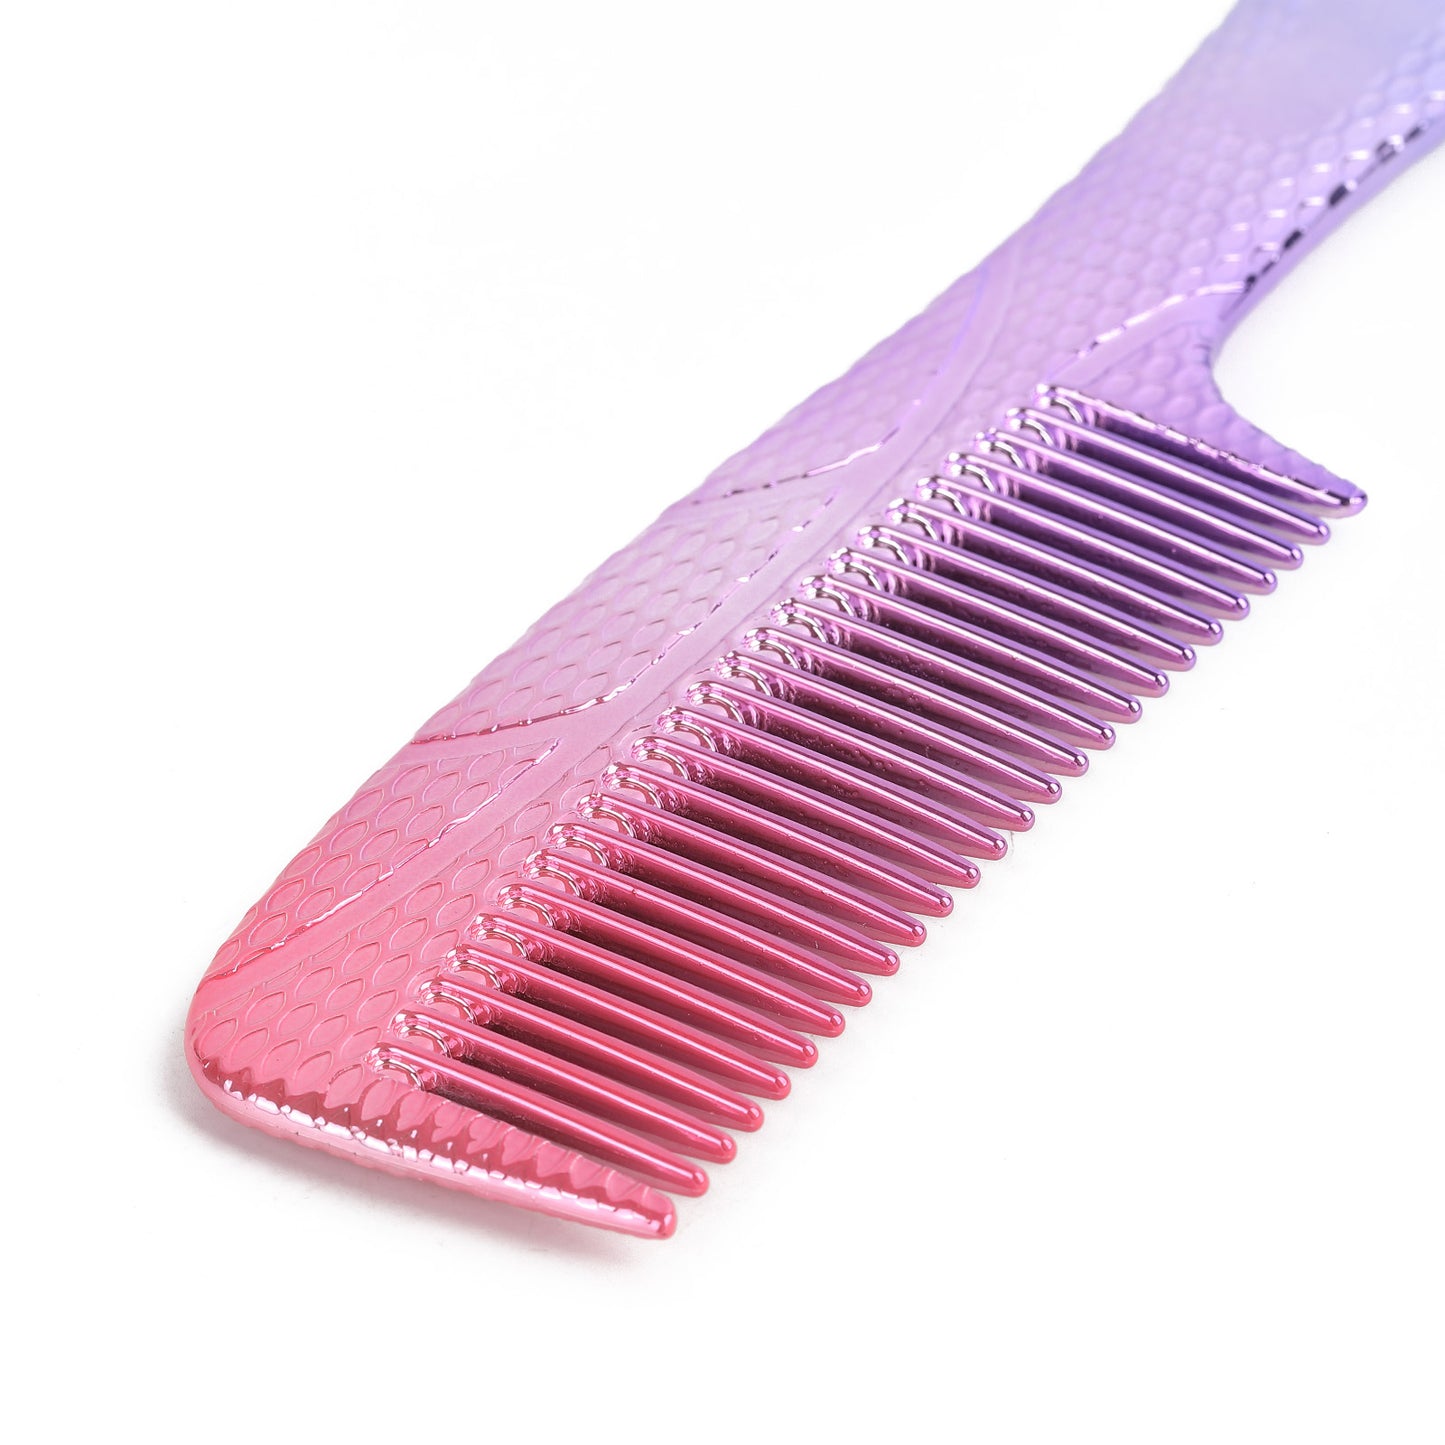 Wide Tooth Comb for Women Curly Wet Hair Comb Colorful Gradient Men Girls Long Short Thick Fine Hair Curls Detangling Hair Combs Fashion Popular Styling Large